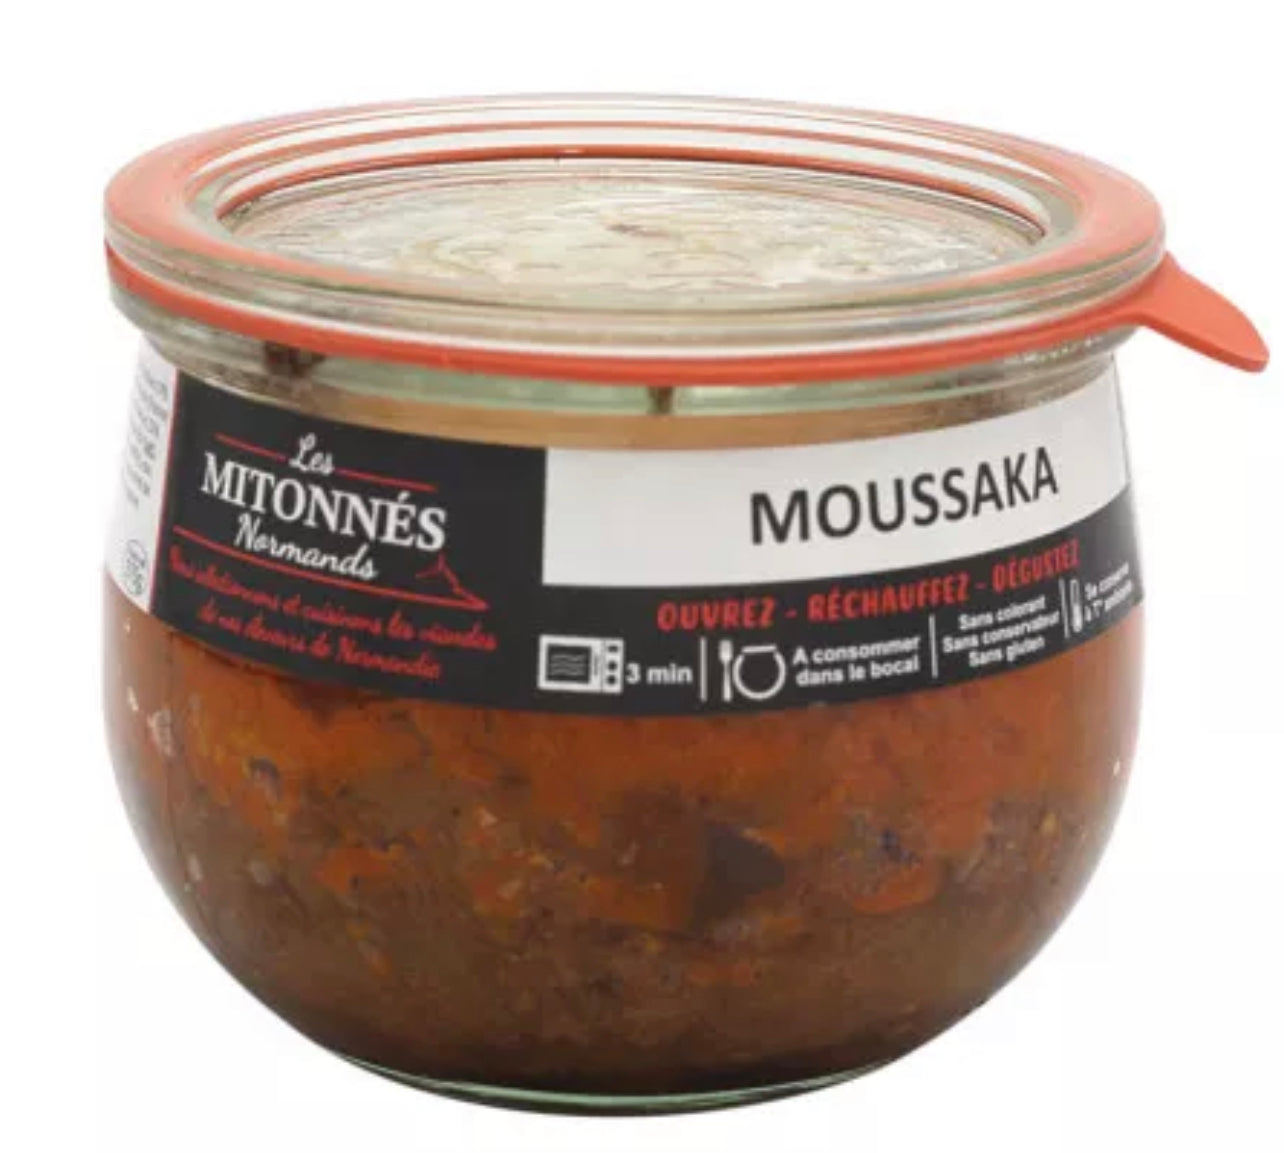 Beef moussaka "Flavors of Normandy" - 375g